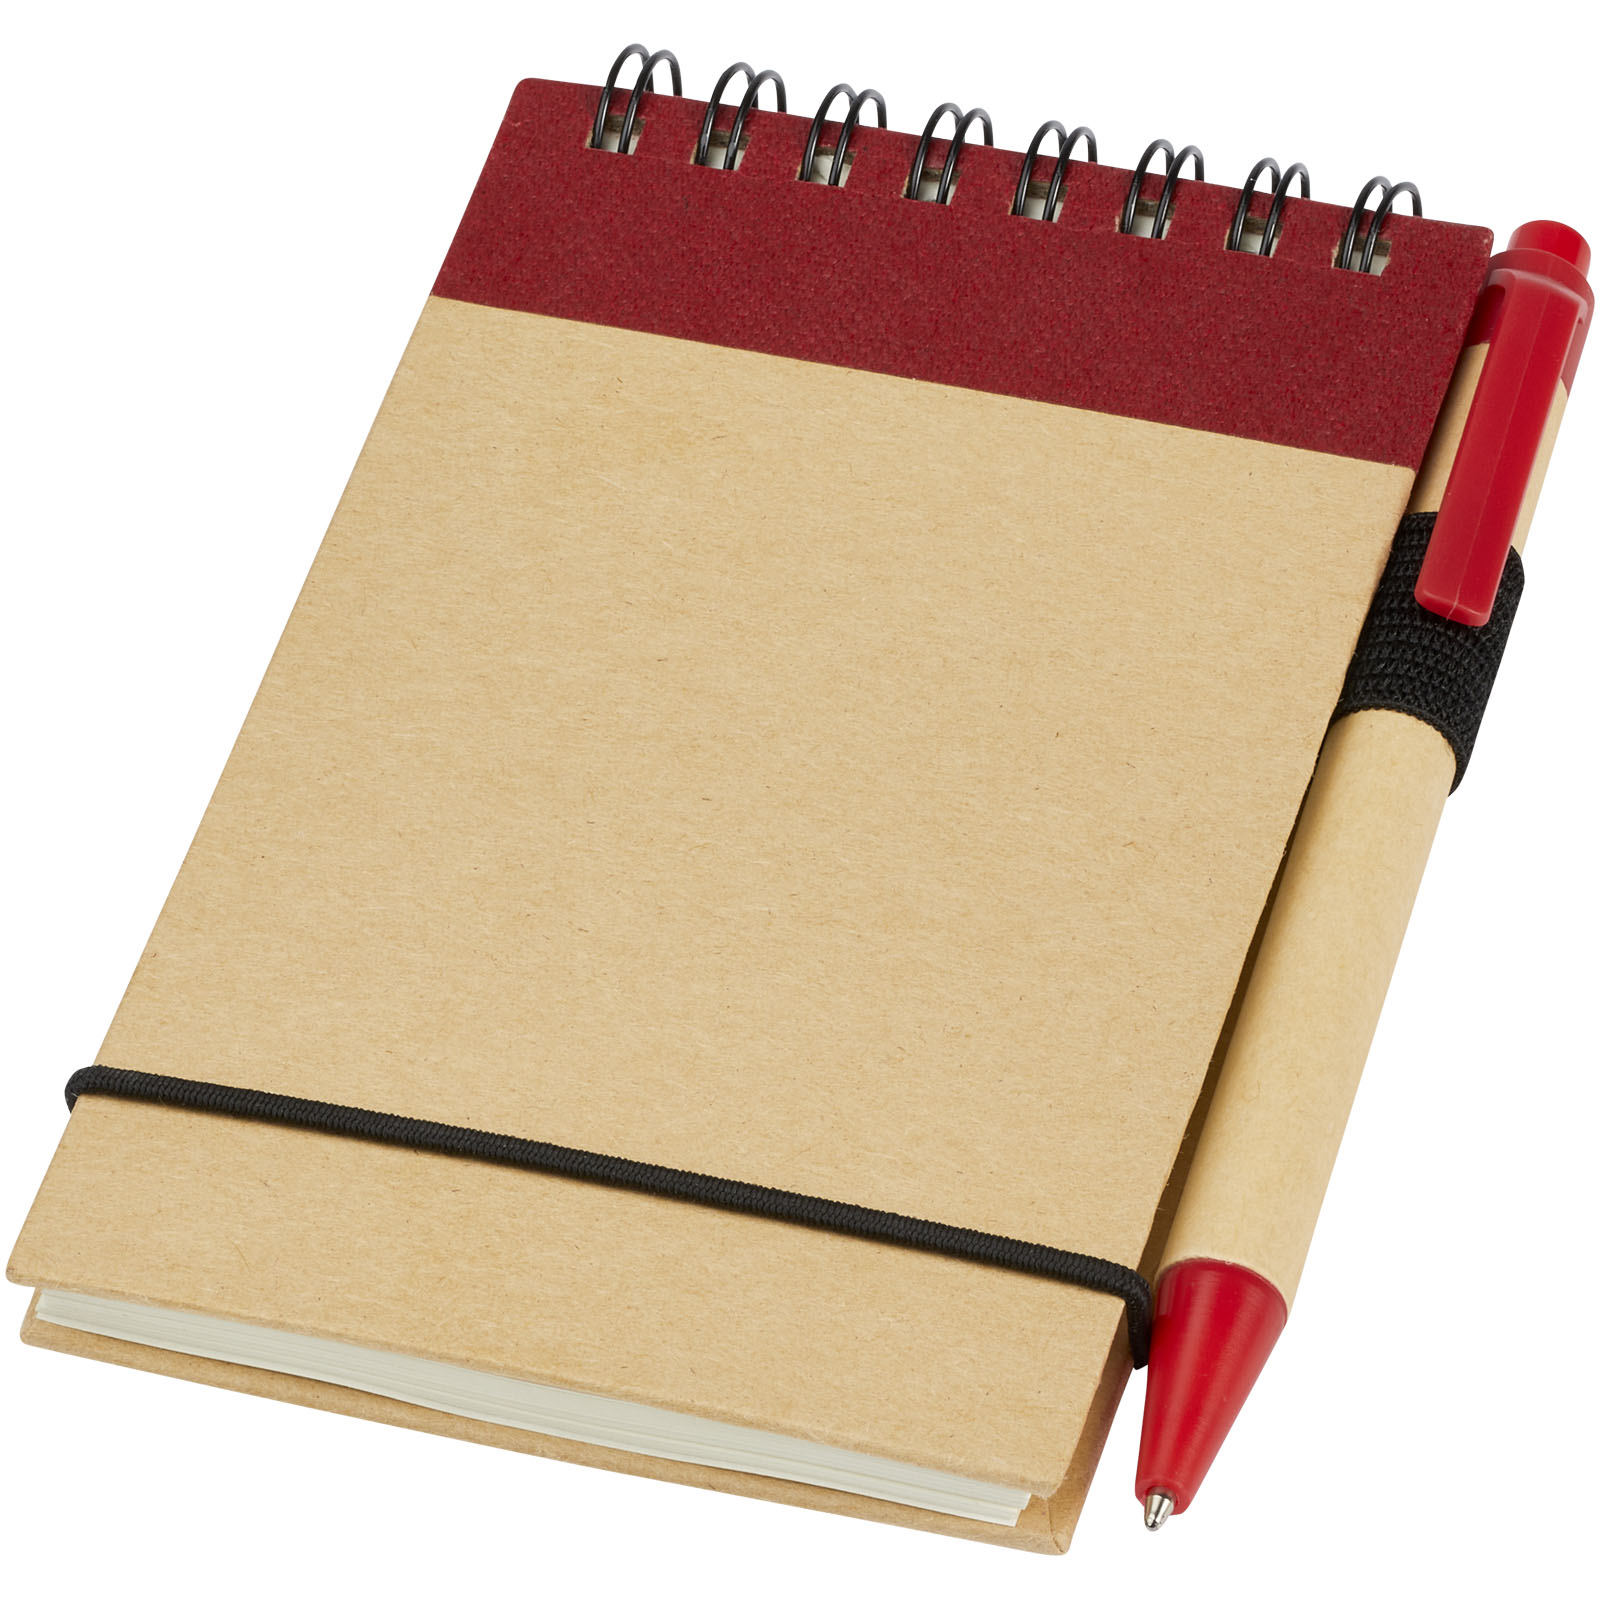 Hard cover notebooks - Zuse A7 recycled jotter notepad with pen